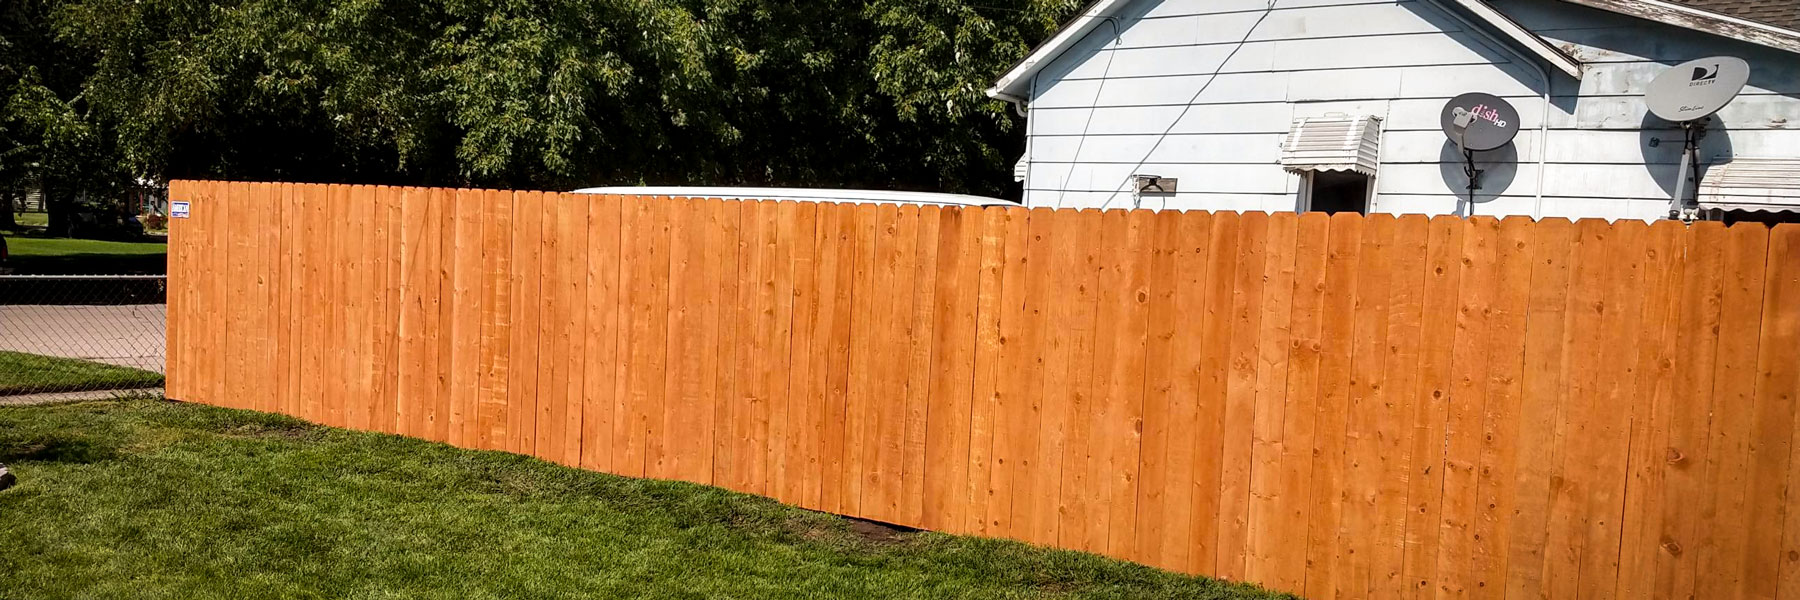 Kearney fence company residential fencing contractors Nebraska wood fencing cedar western red cedar treated pine white red yellow CCA  ACQ2 incense fir 2x4 1x6 2" x 4"  1" x 6"  nails stain solid privacy picket scalloped board on board shadow box pickets rails posts installation panels post caps modern horizontal backyard front yard ranch gate garden diy split rail house lattice old rustic vertical metal post picket dog ear contemporary custom 